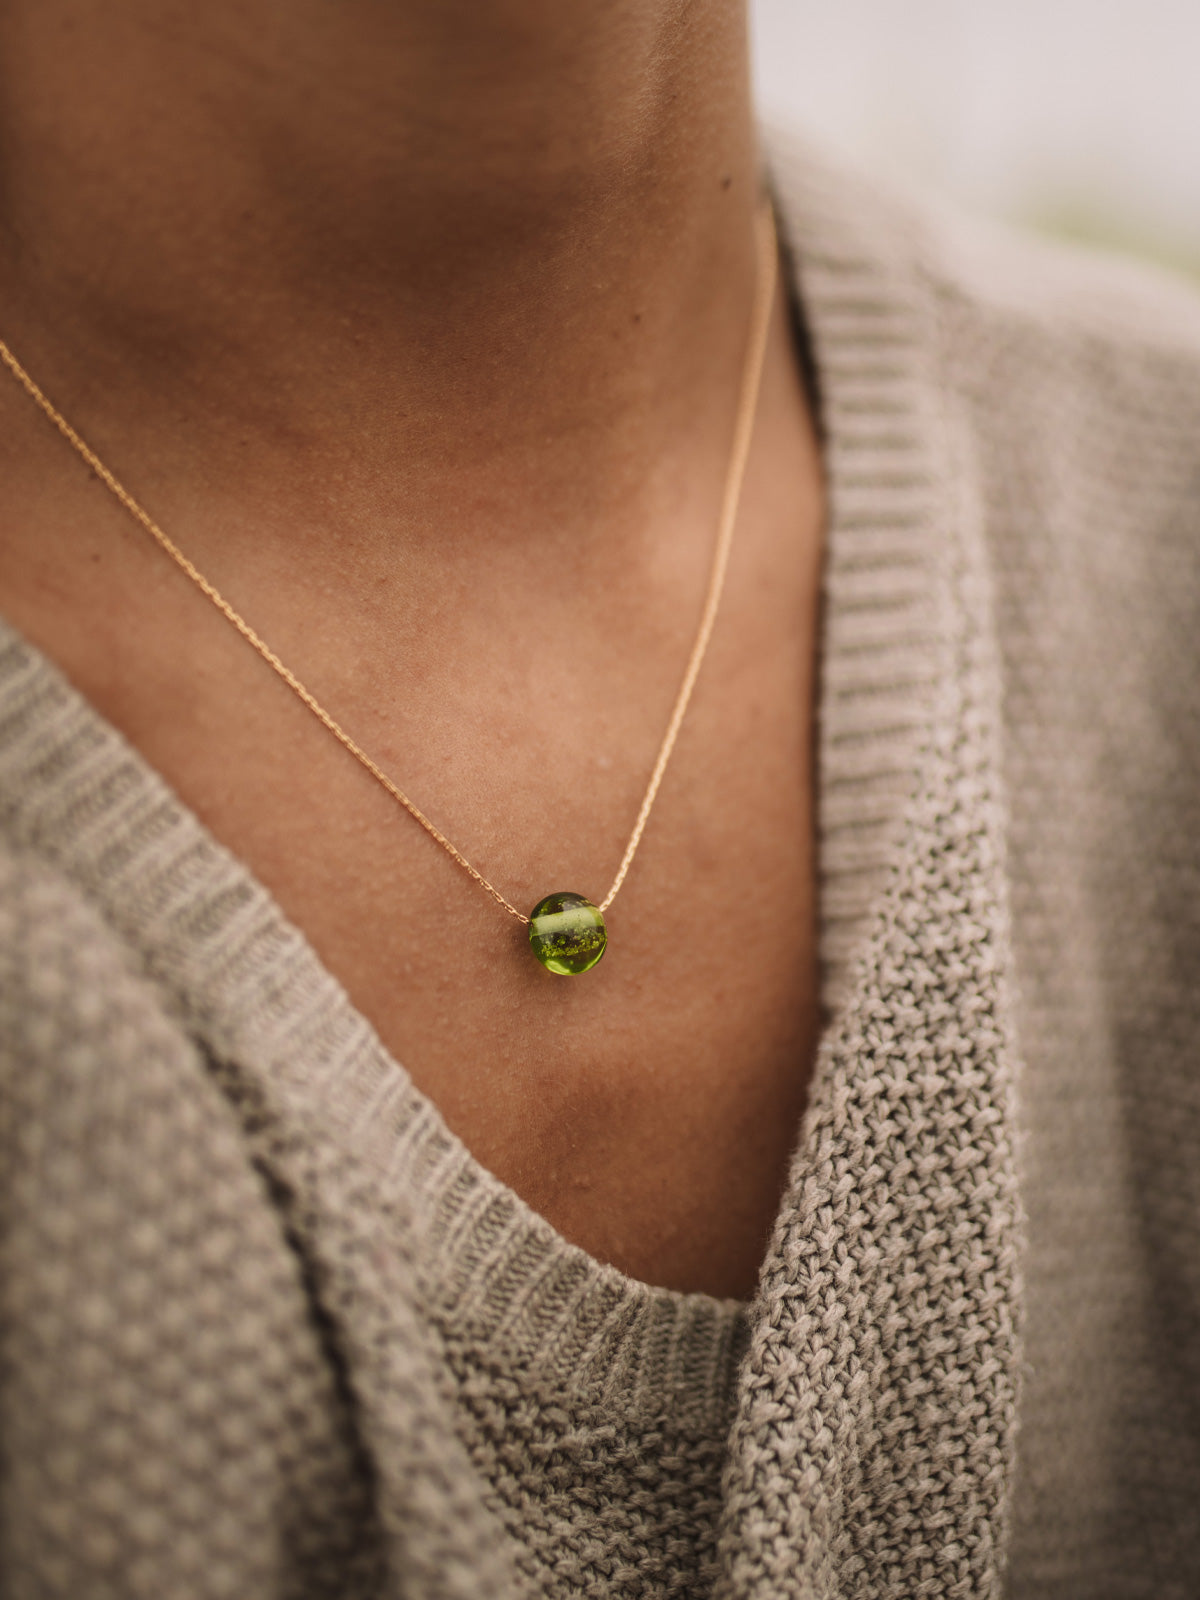 Green glass pebble necklace on fine gold chain.